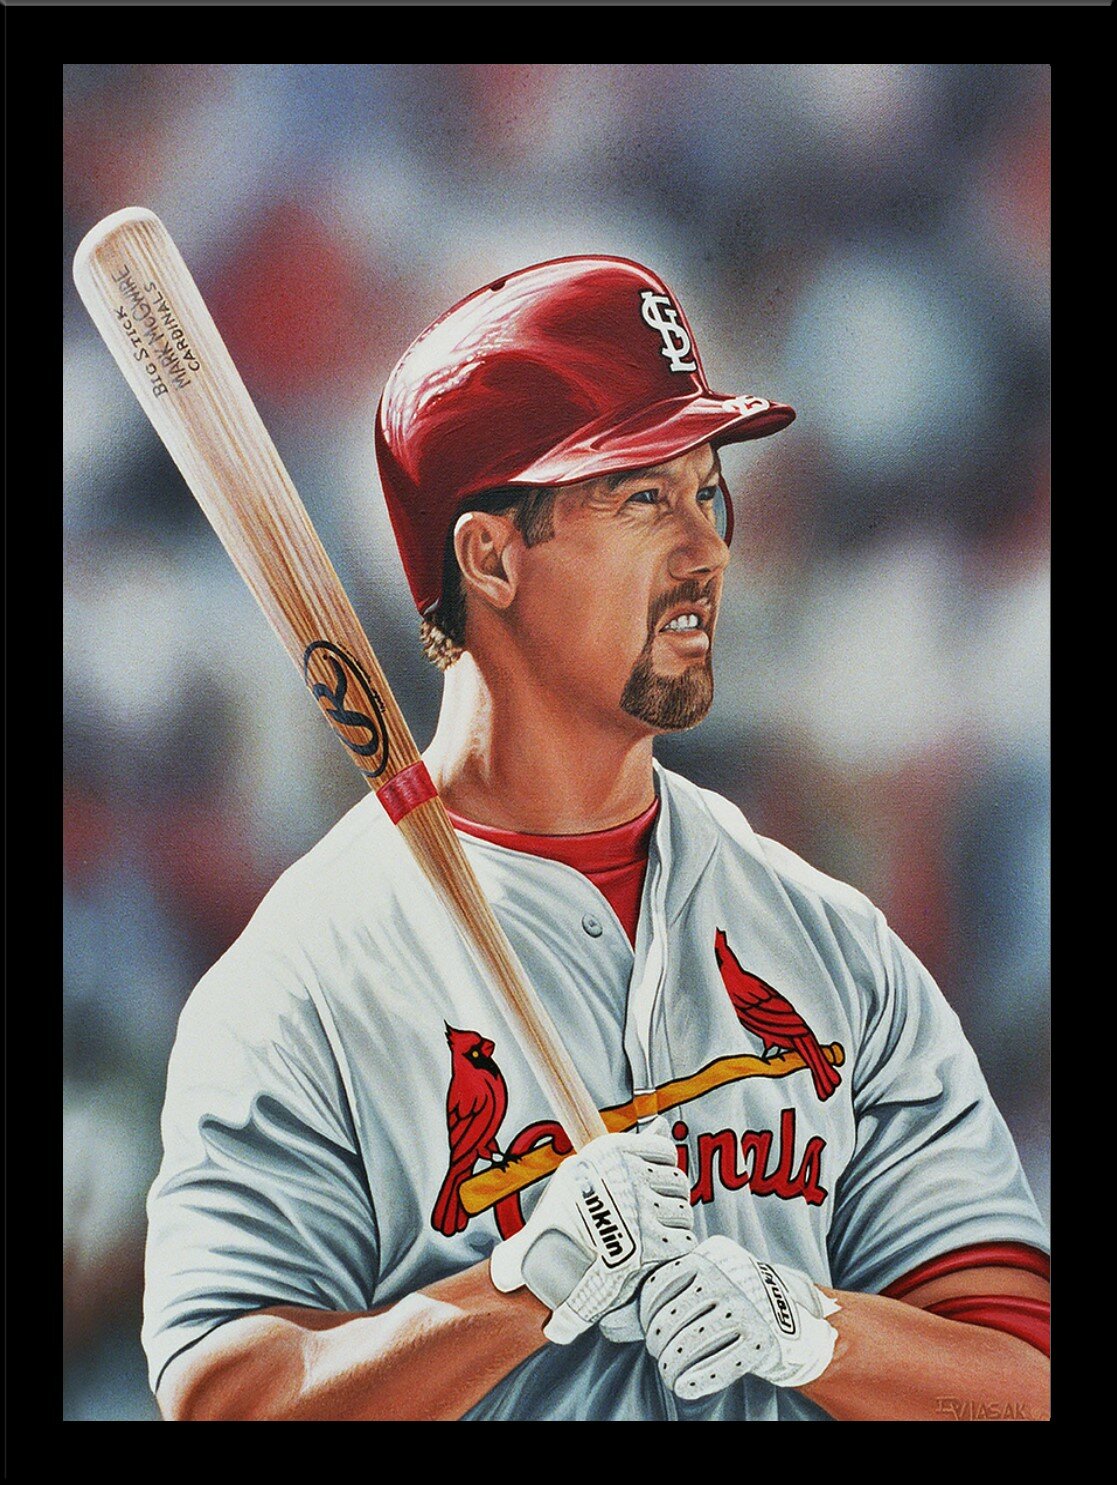  Buyartforless Canvas Mark McGwire St. Louis Cardinals by Darryl  Vlasak 16x12 Painting Print On Wrapped Canvas Memorabilia Baseball Legend.  Made in The USA!: Posters & Prints